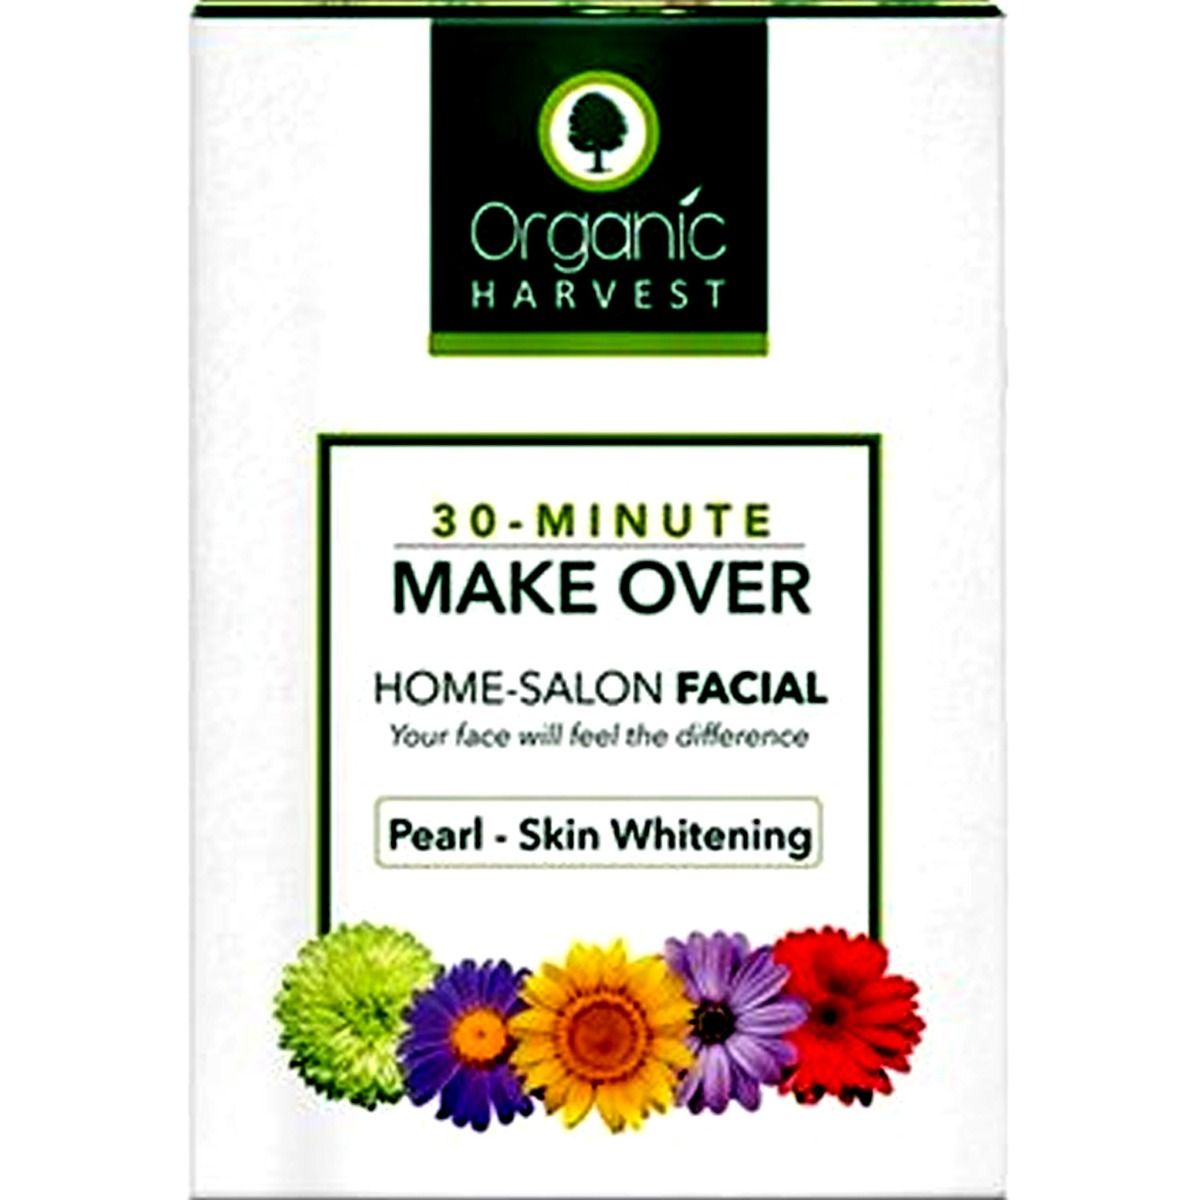 Organic Harvest Pearl-Skin Whitening Facial Kit, 1 Count, Pack of 1 